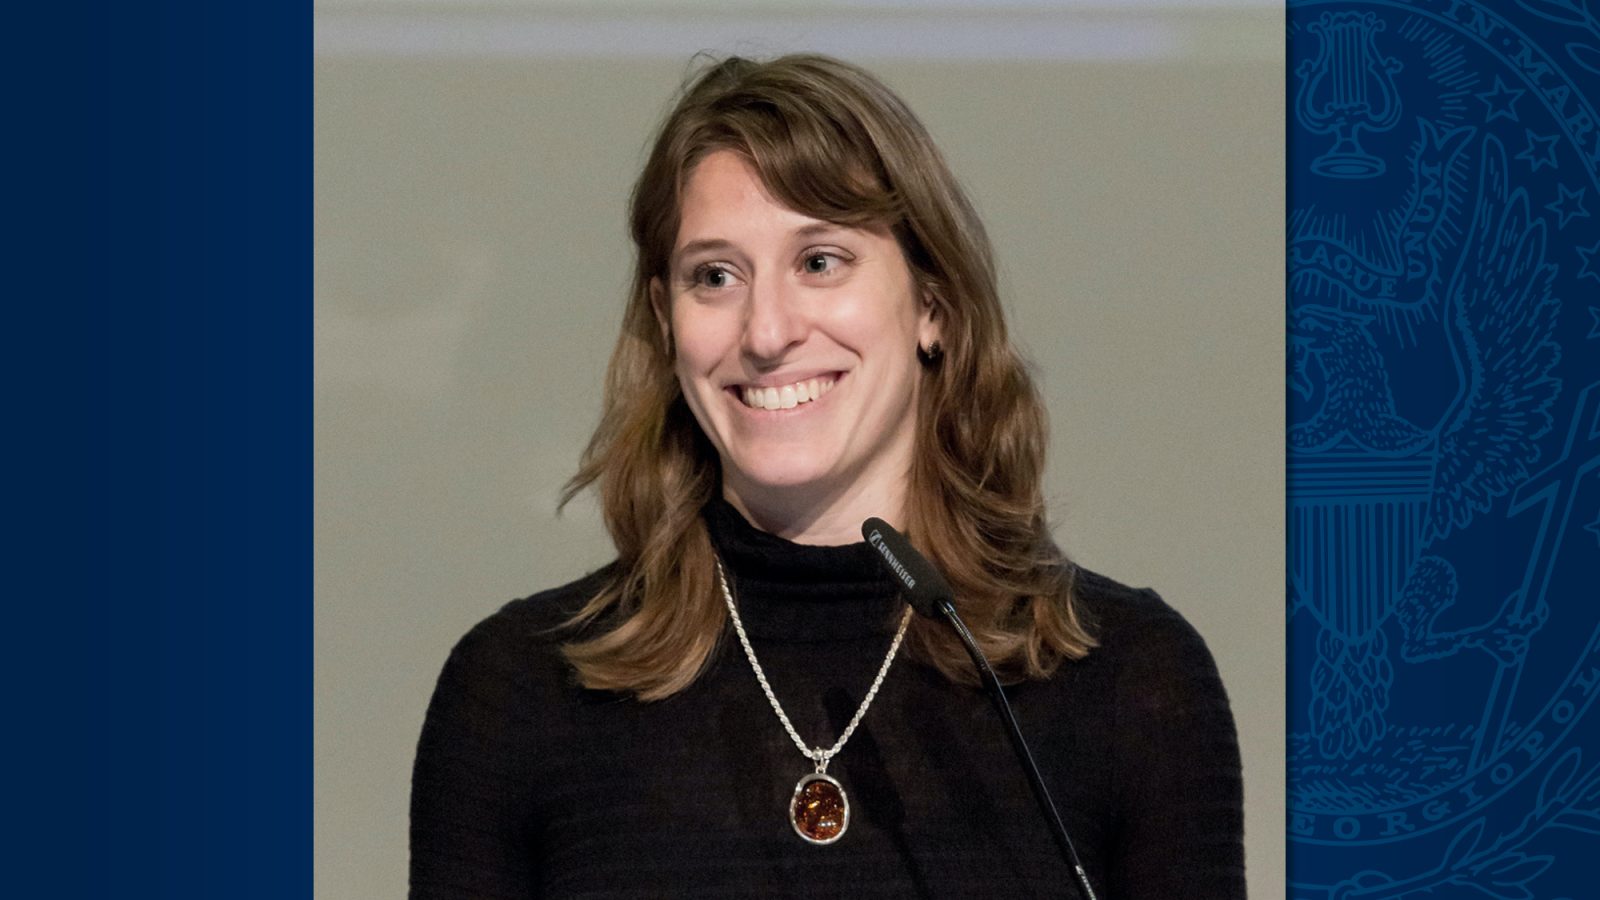 A white woman with brown hair smiles in front of a podium. She wears a black shirt and a necklace.